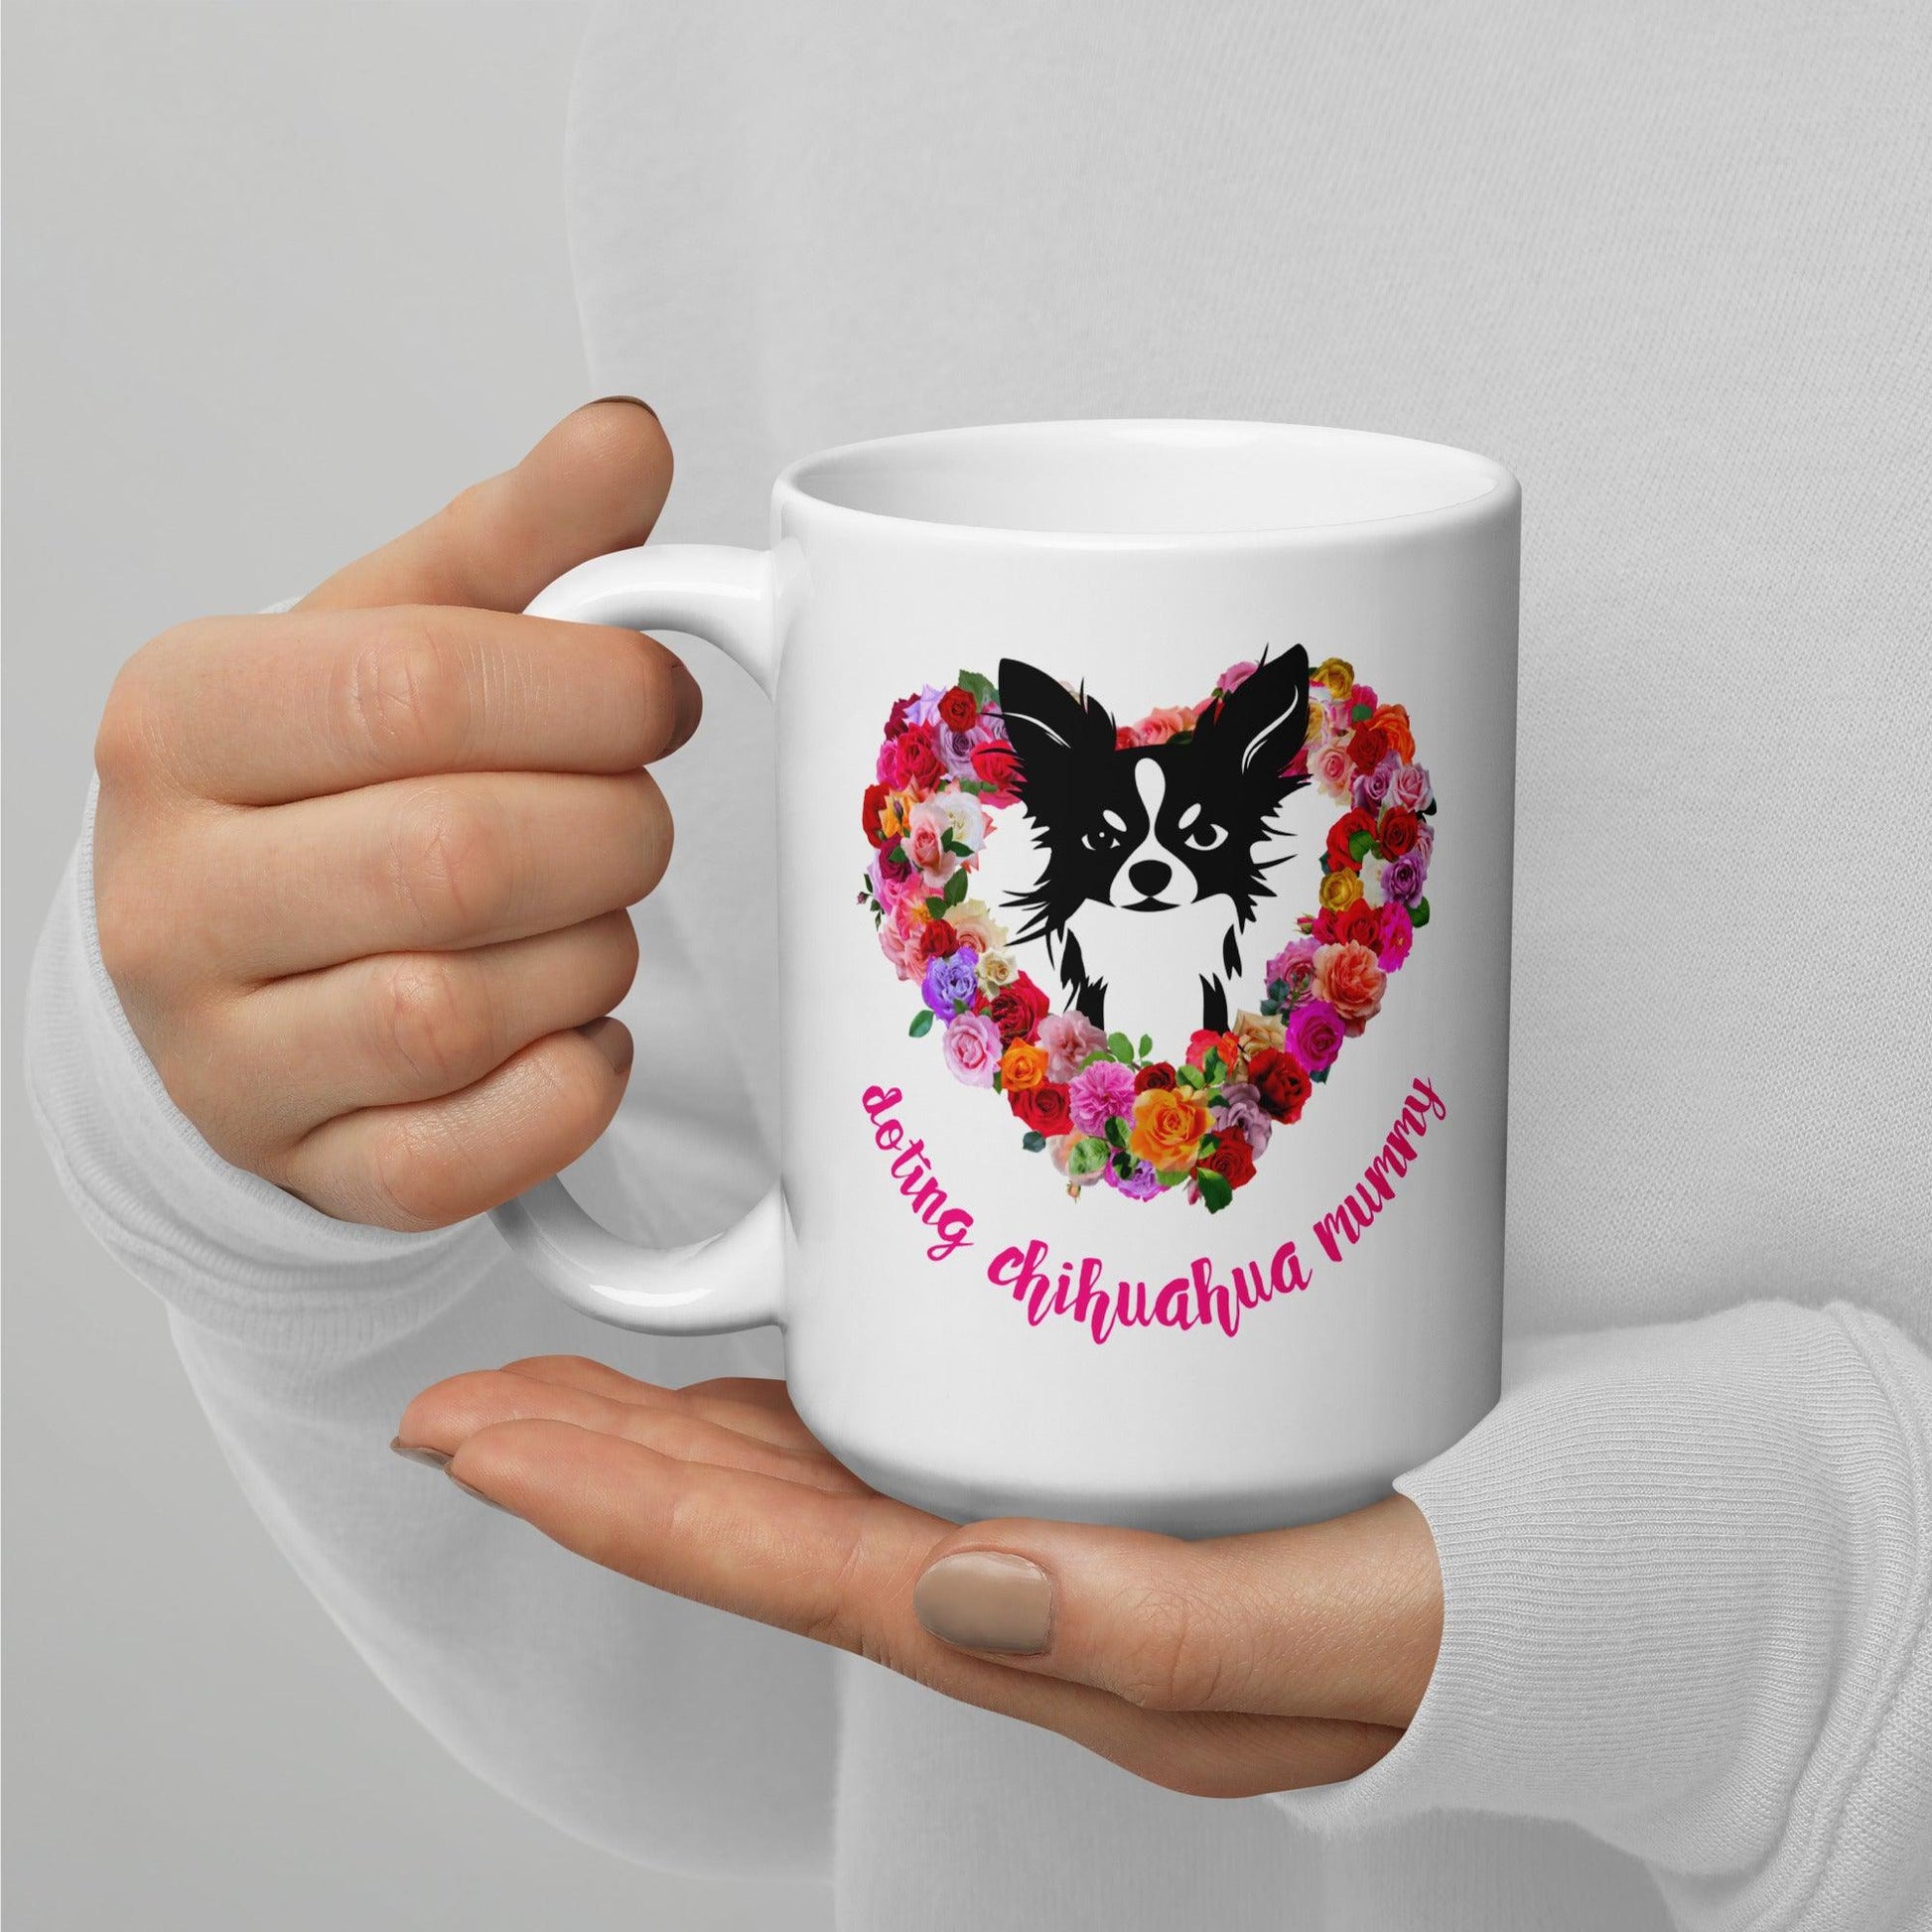 Doting Chihuahua Mummy mug. Available in three sizes. There's something so special about the bond between a girl and her chi baby. These cute little dogs charm their way deep into their mum's heart. This adorable chihuahua and roses mug makes a divine Mother's Day / birthday / Christmas gift for a doting chihuahua mummy. "Aw" guaranteed! Design by Renate Kriegler for Chimigos.